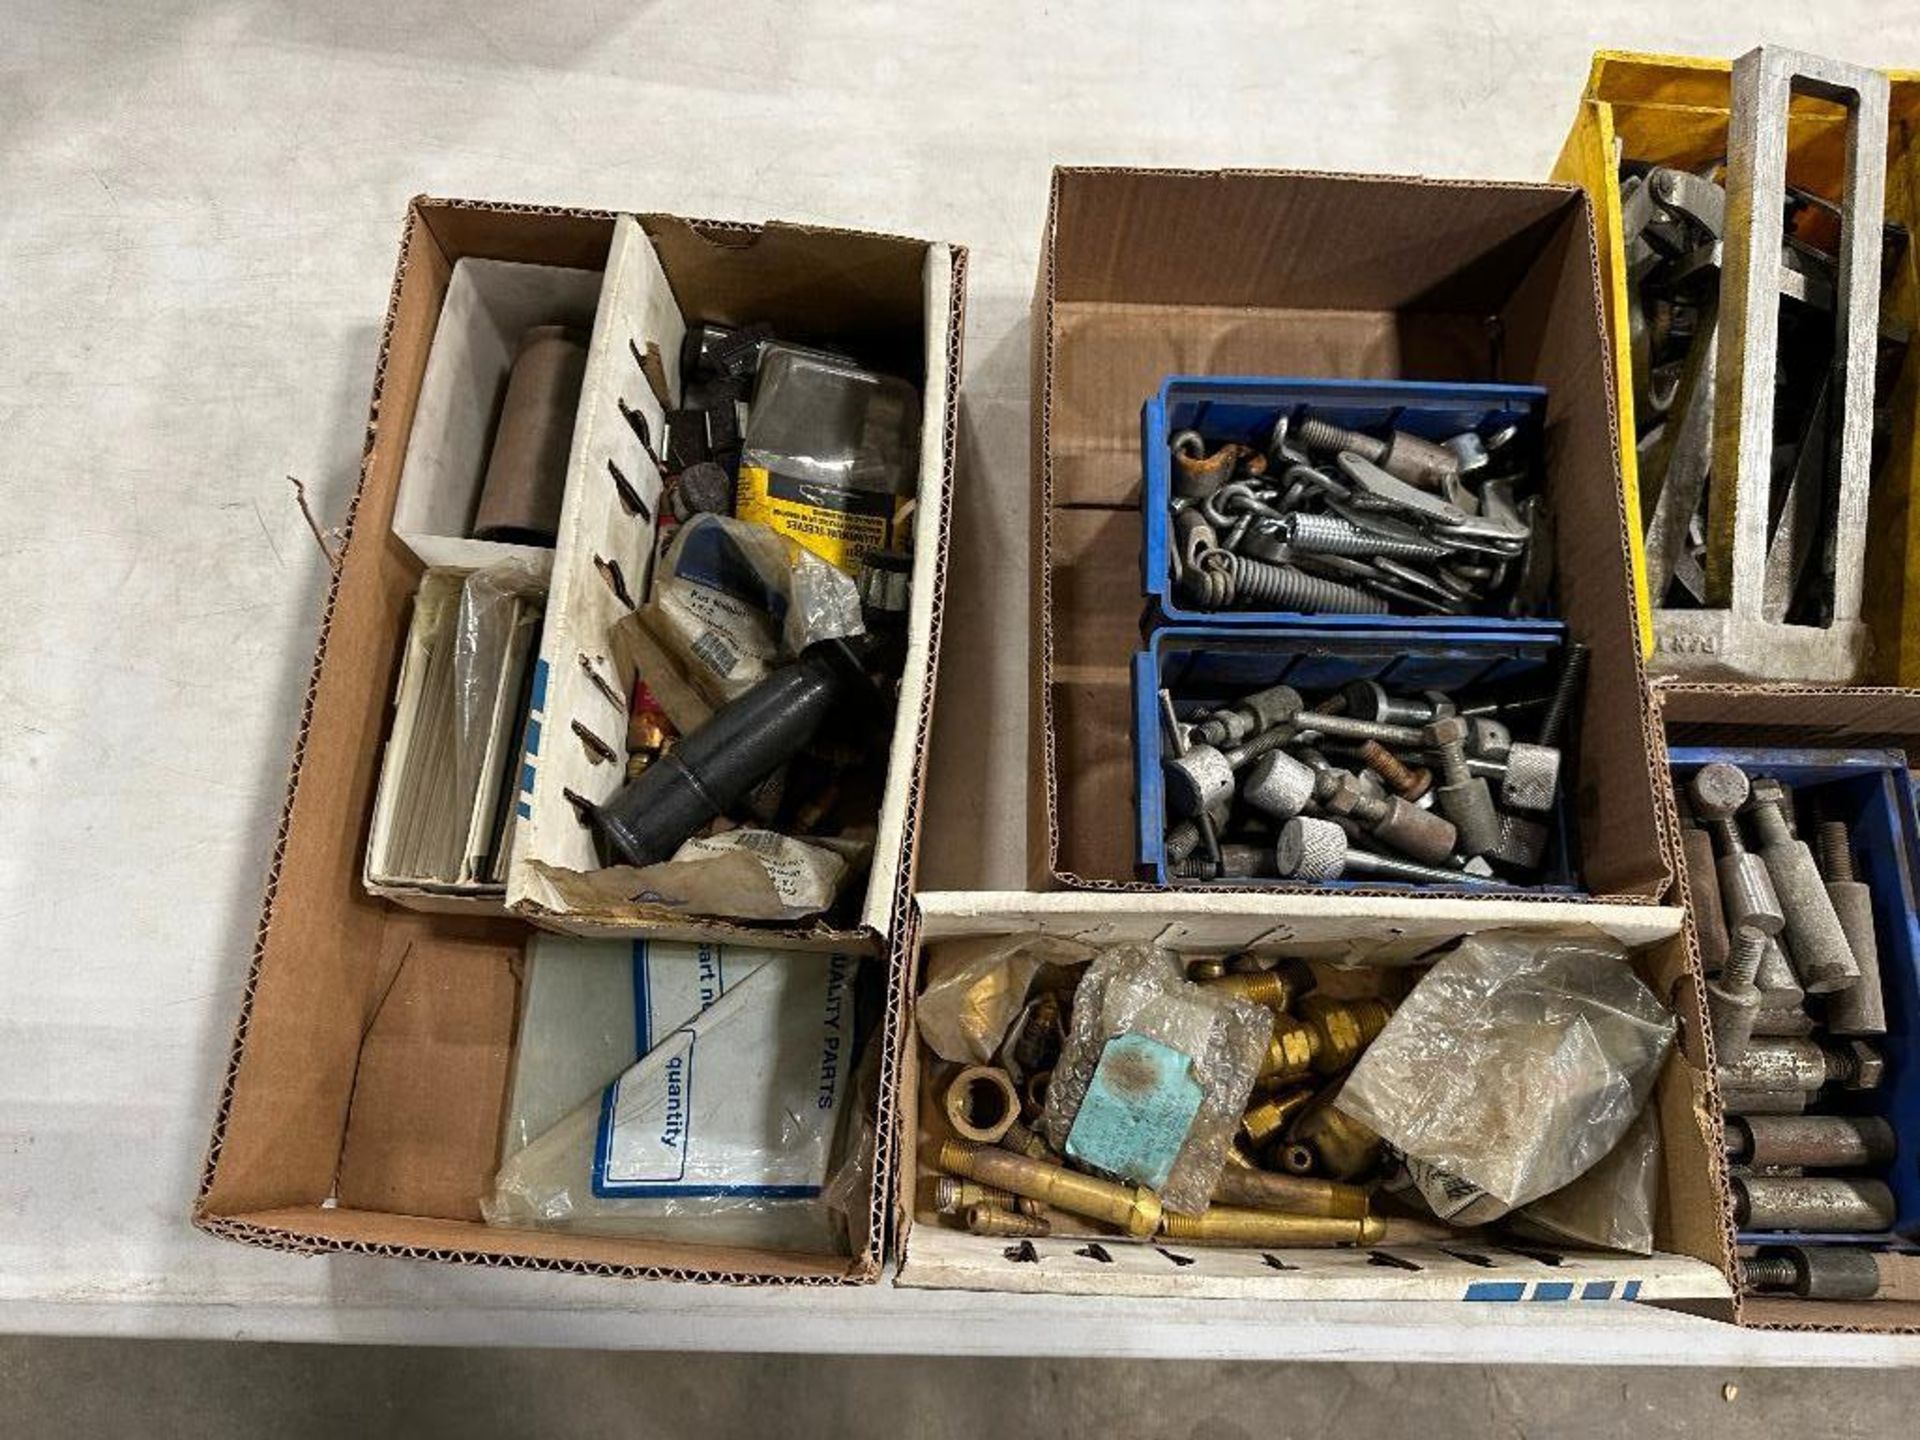 Lot of Asst. Parts, including Brass, Springs, Bolts, etc. - Image 4 of 5